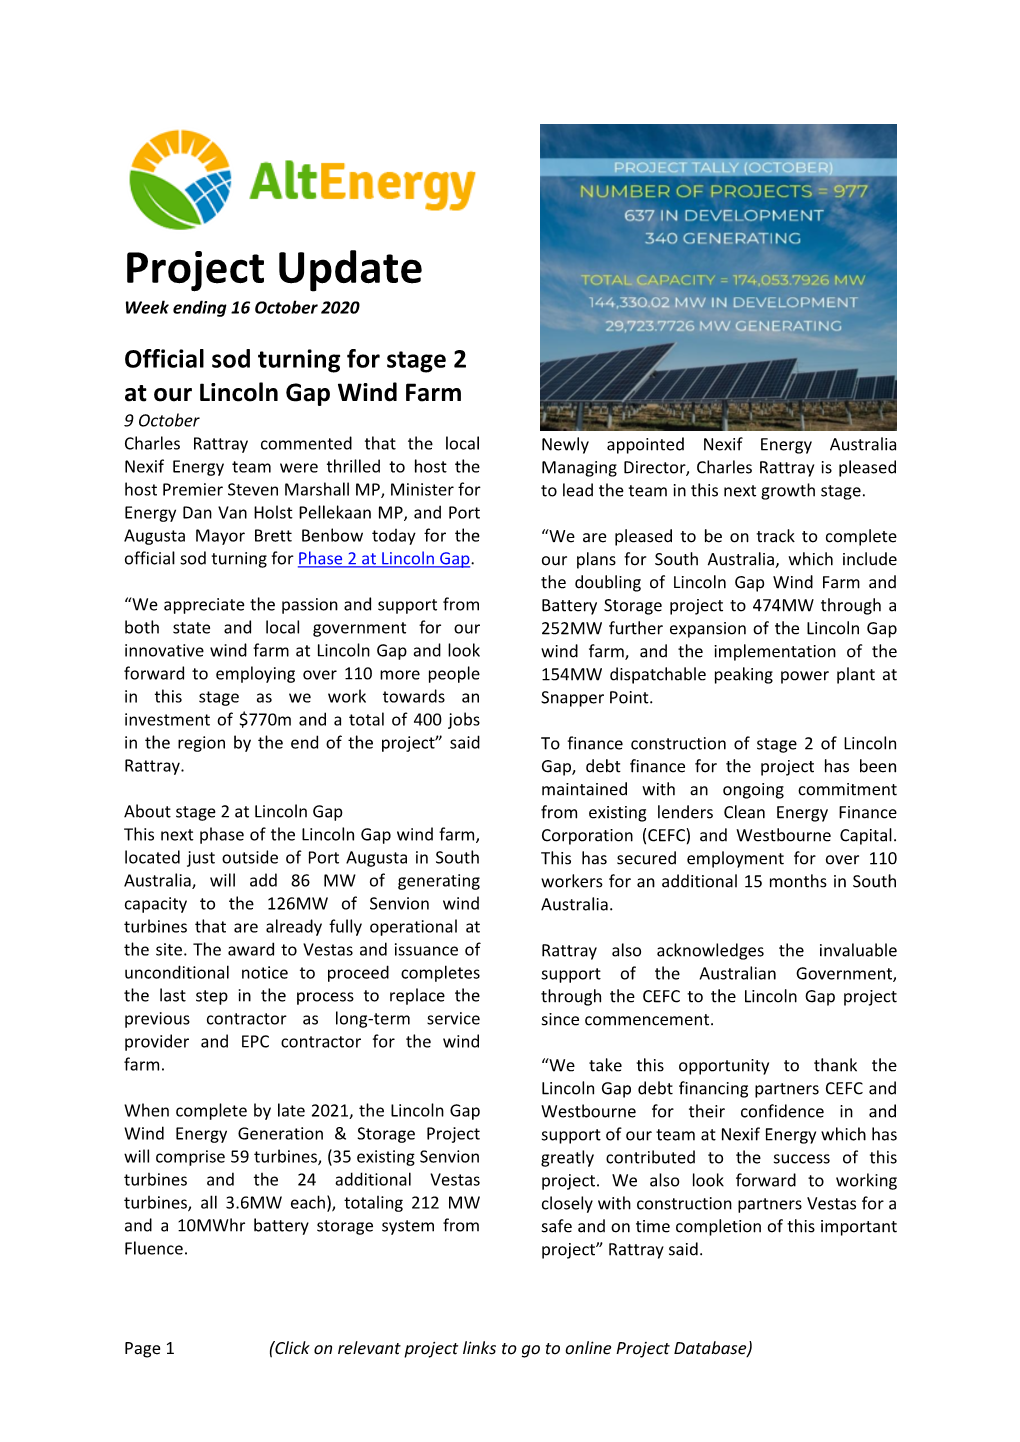 Dundonnell Wind Farm Update South West Interconnected System (SWIS)